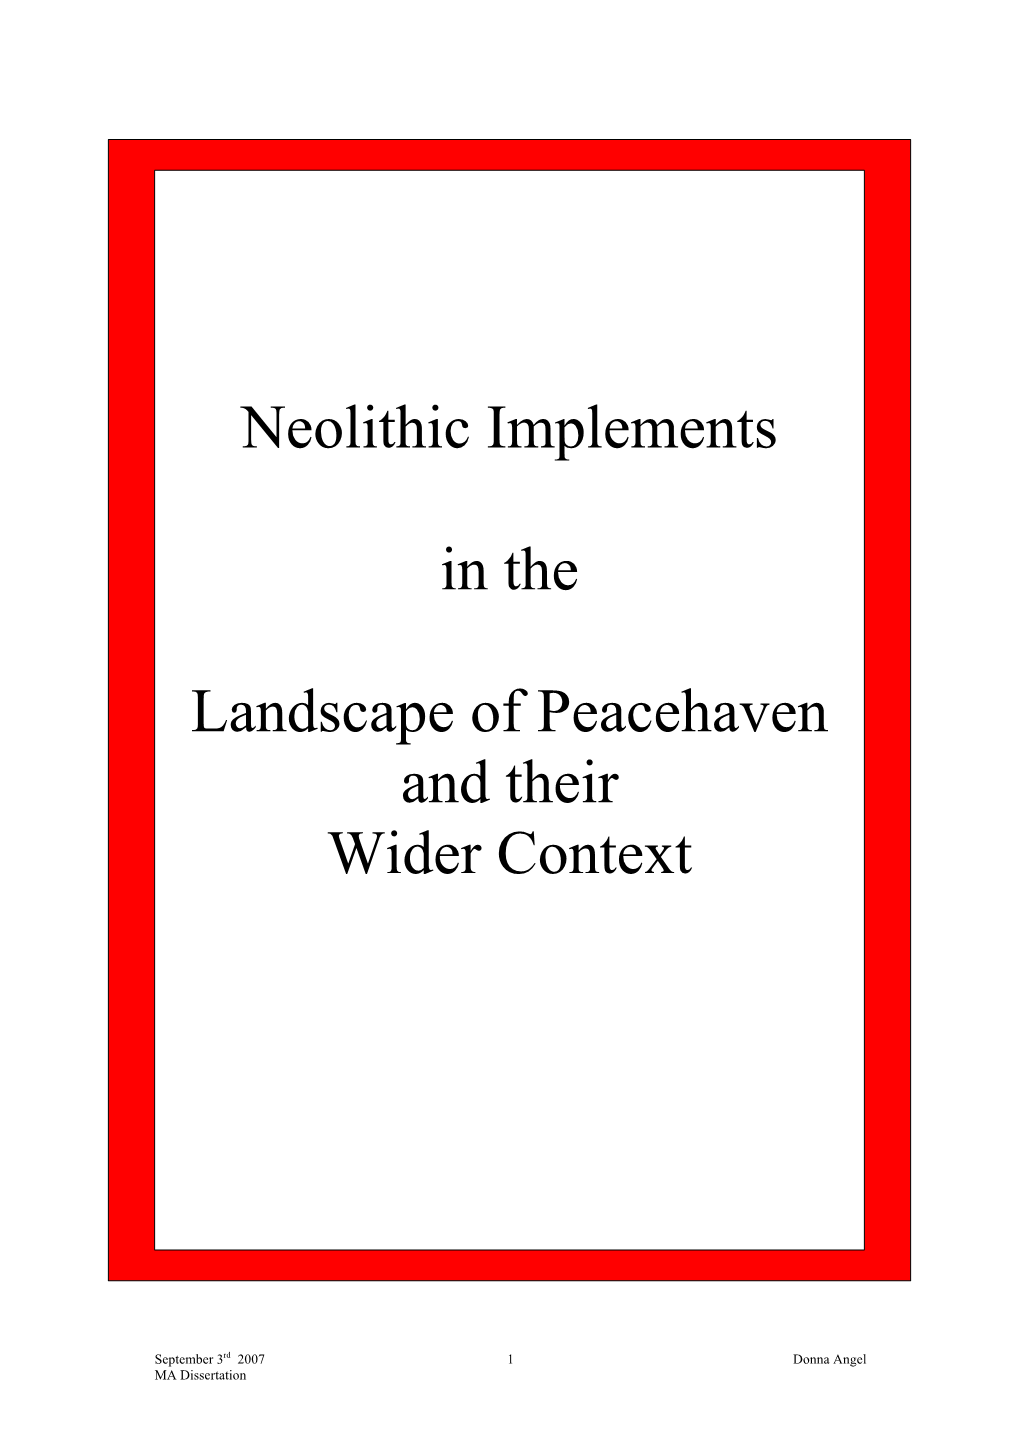 Neolithic Implements in the Landscape of Peacehaven and Their Wider Context Abstract